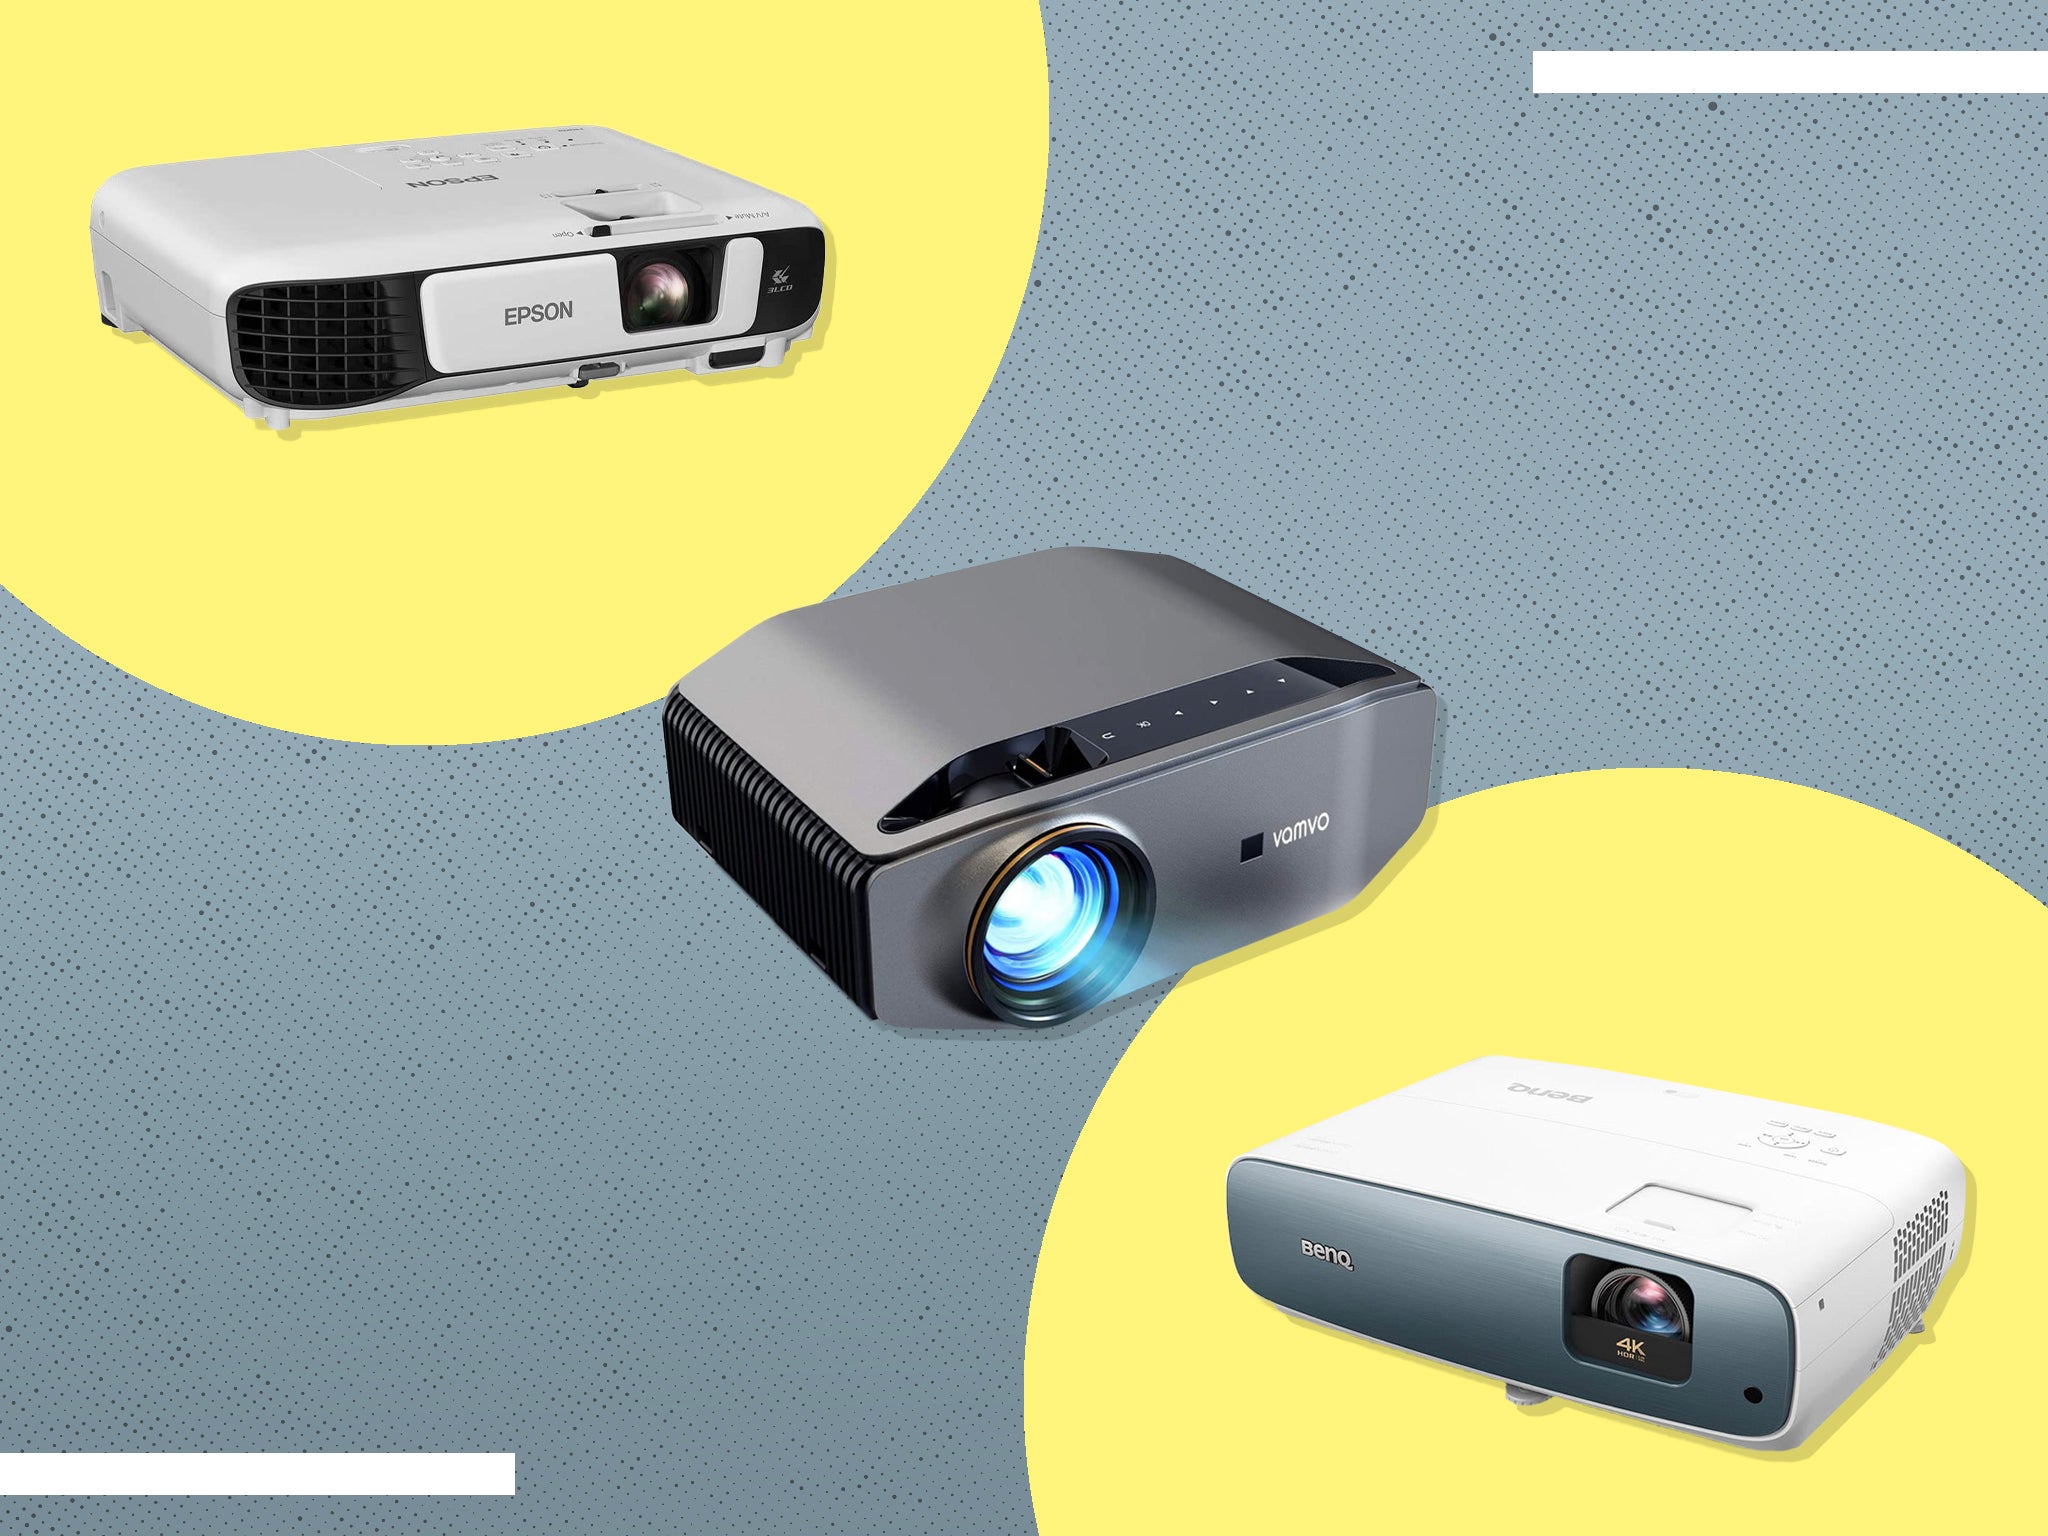 We tested the projectors with a range of games, both online and off